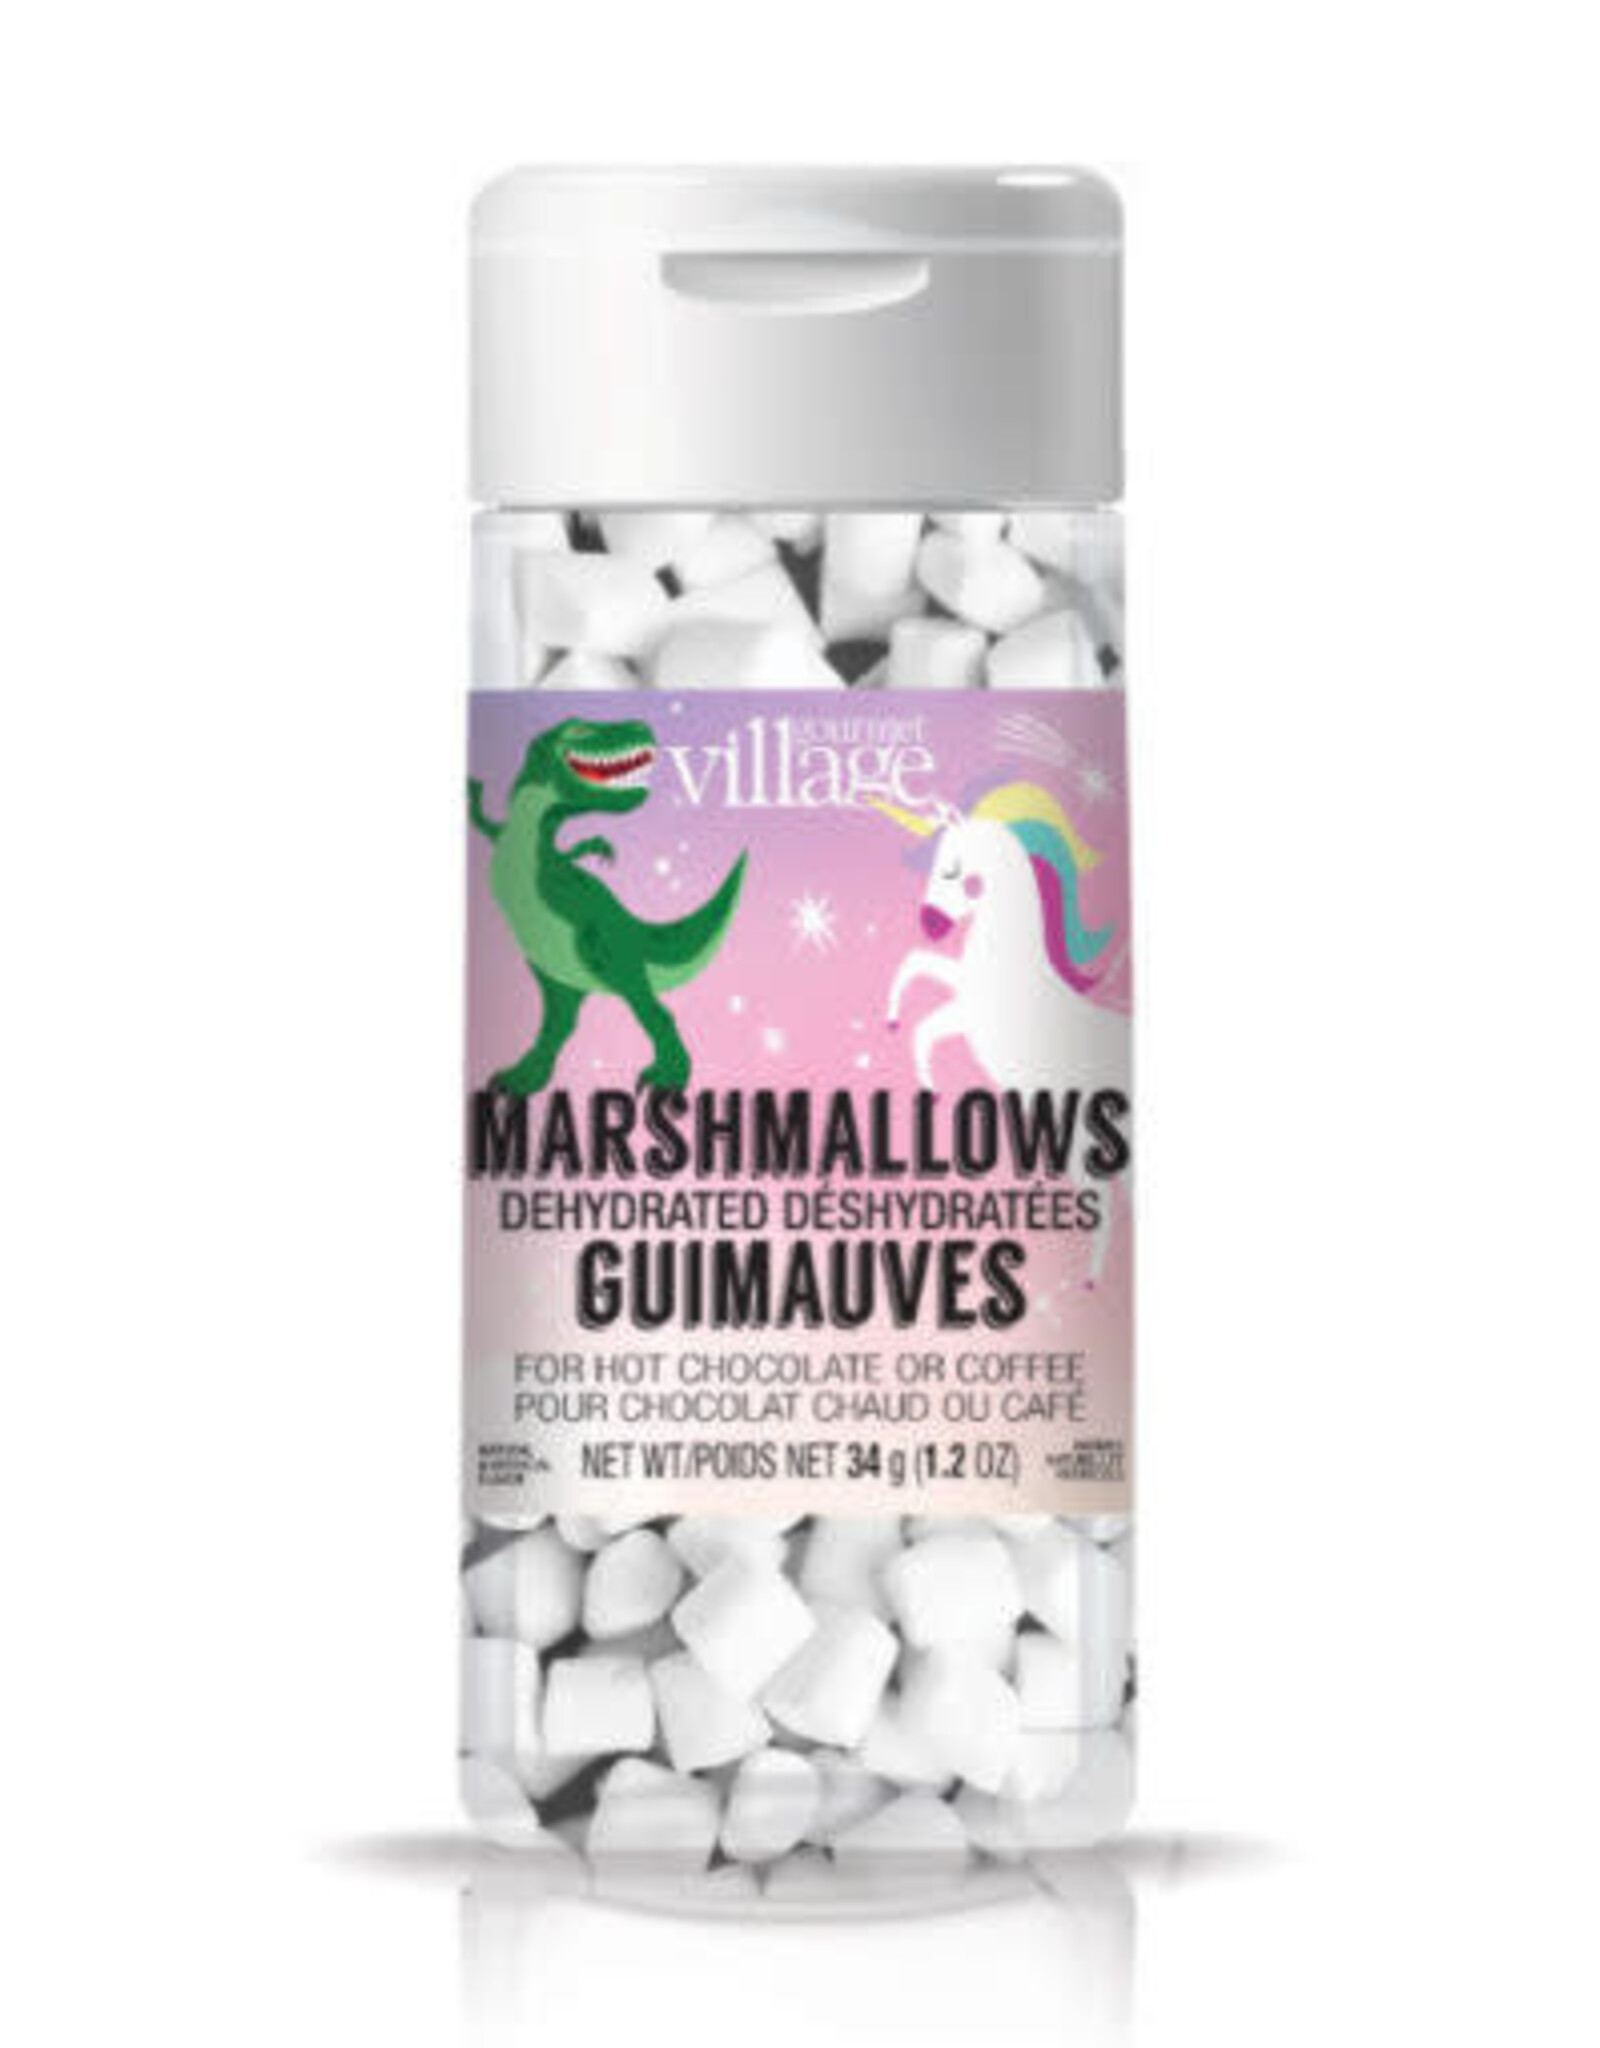 Gourmet Village Dehydrated Marshmallow Whimsical